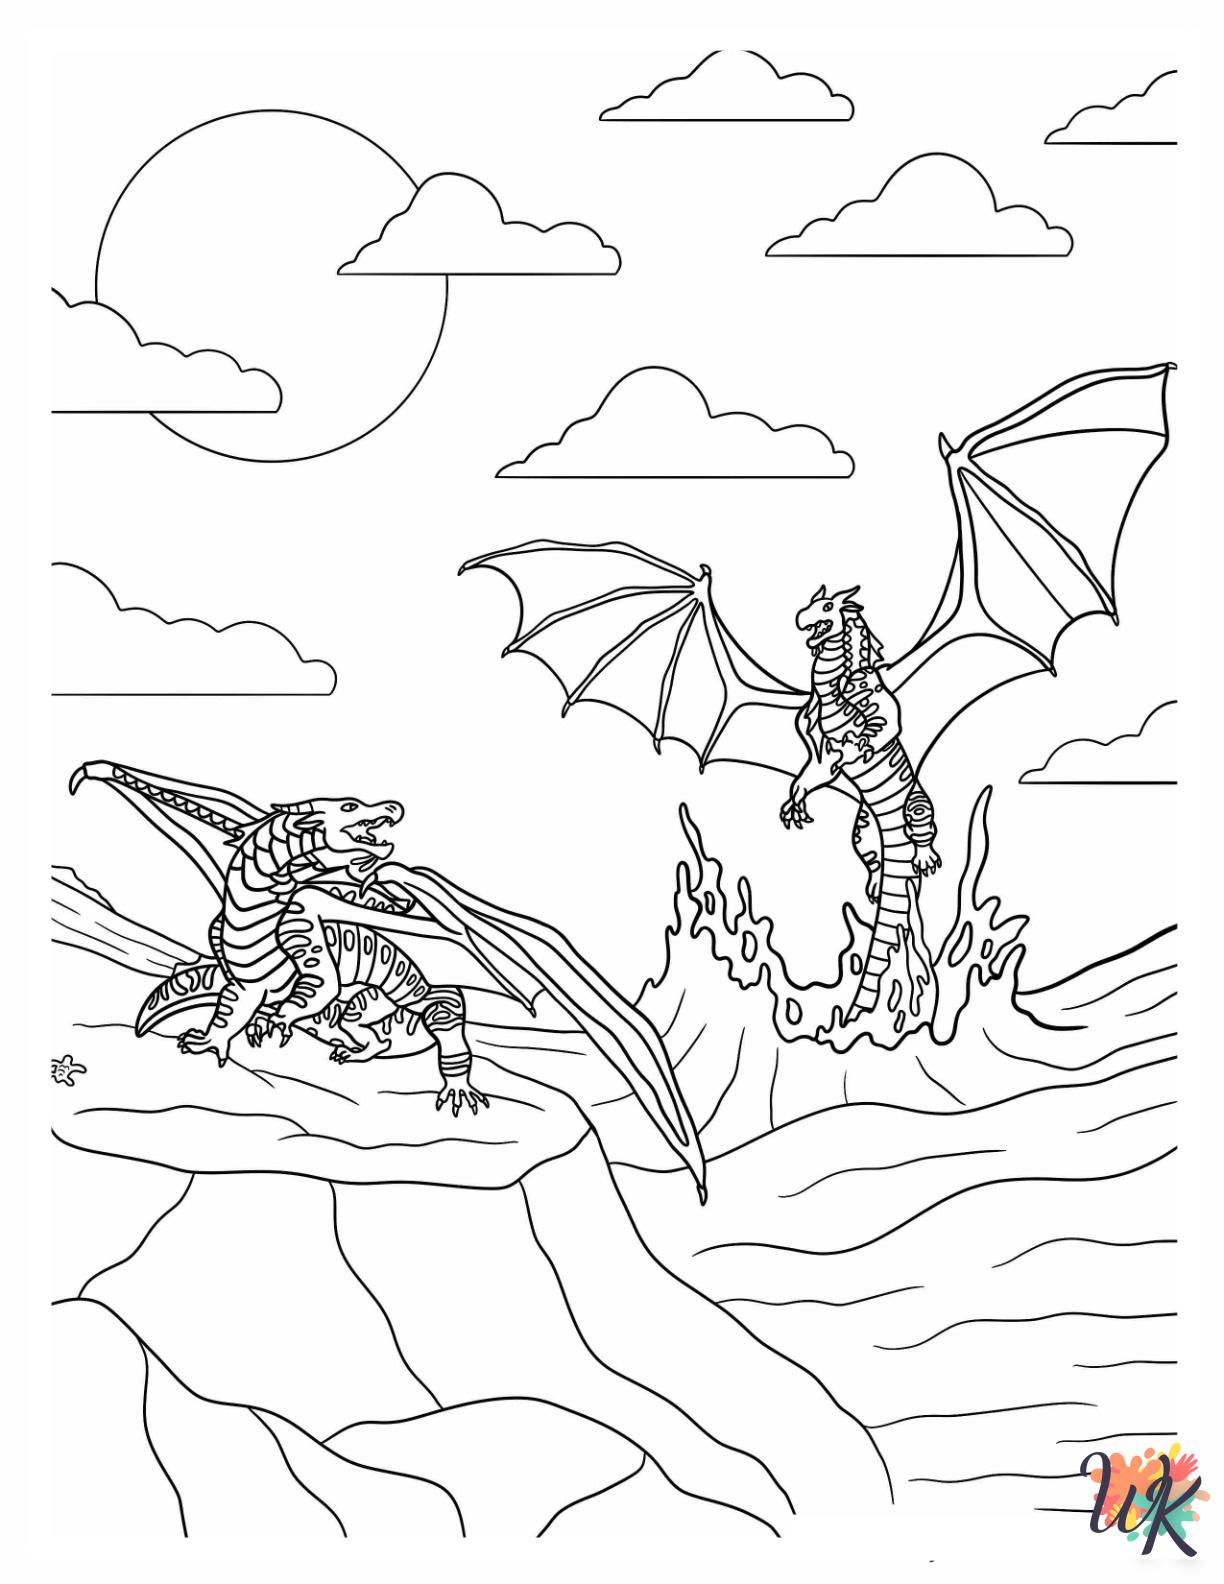 Wings Of Fire coloring pages for adults easy 2